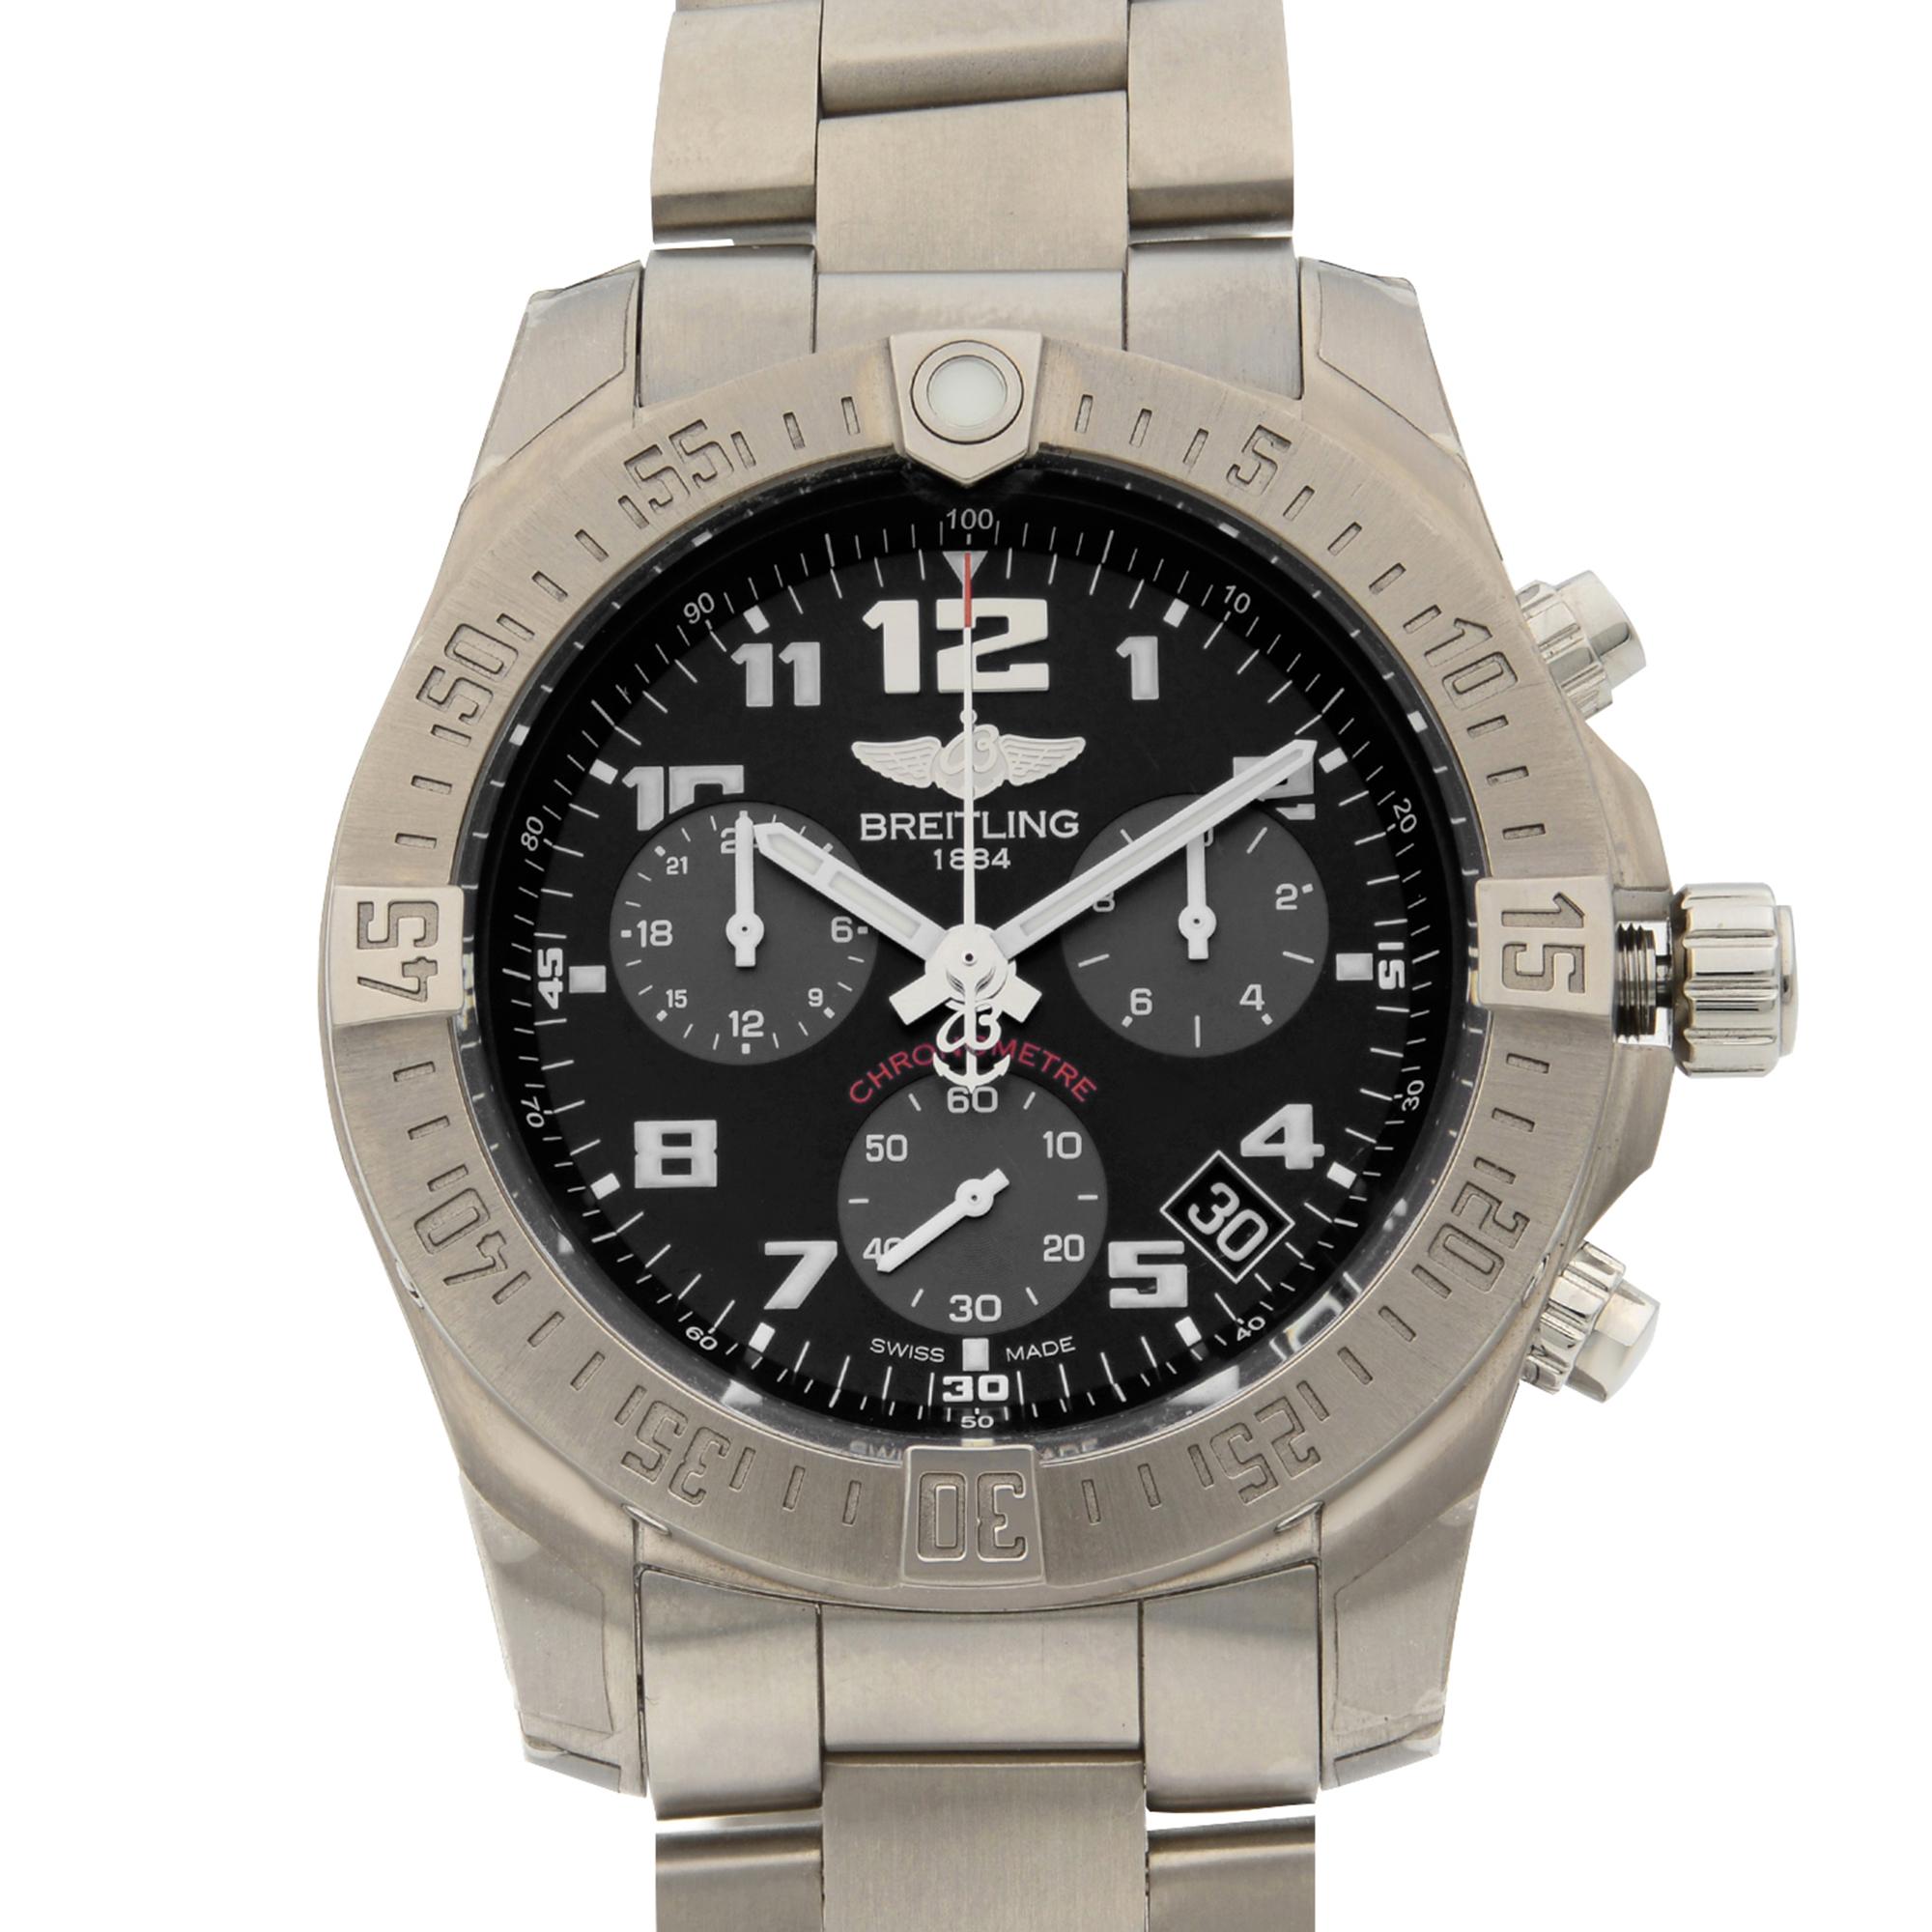 This display model Breitling Chronospace EB601010/BF49-152E is a beautiful men's timepiece that is powered by quartz (battery) movement which is cased in a titanium case. It has a round shape face,  dial and has hand arabic numerals style markers.